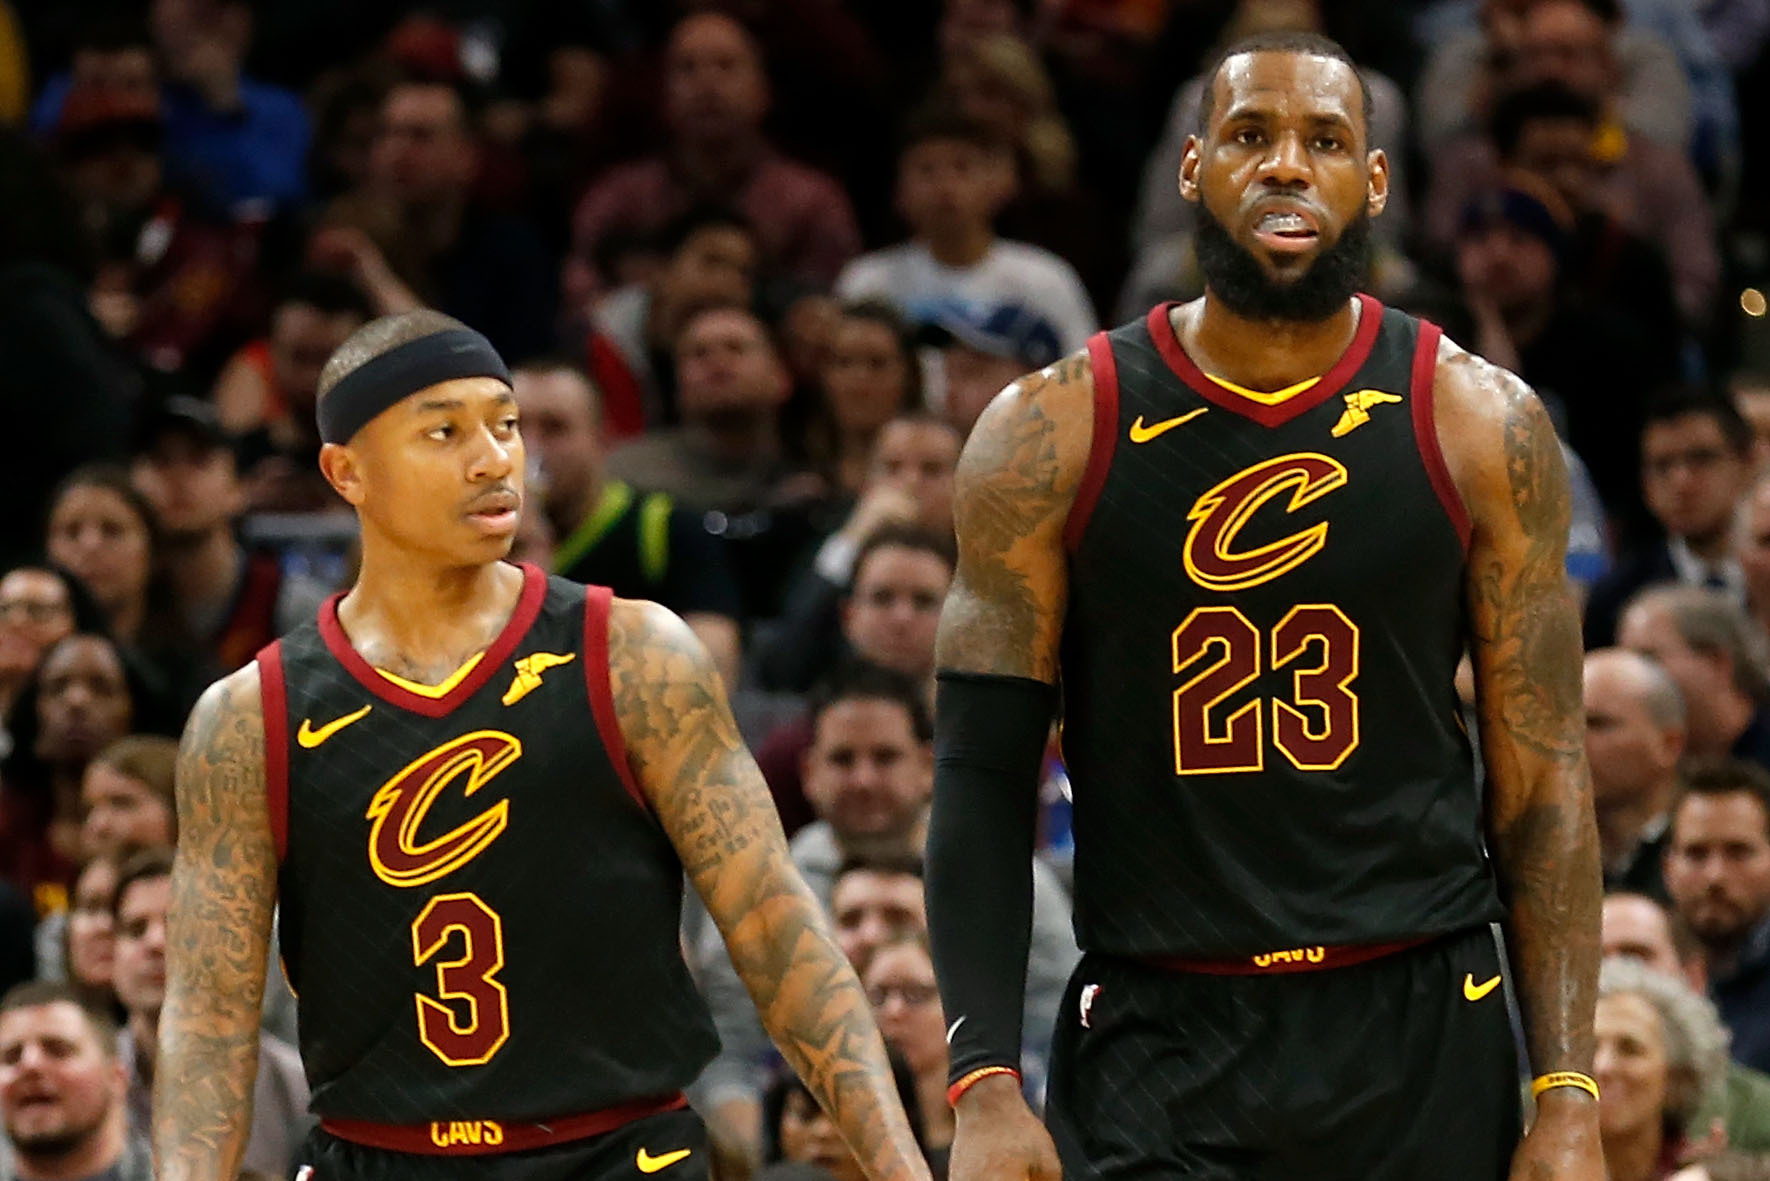 The NBA store may have prematurely publicized Isaiah Thomas Cavs gear